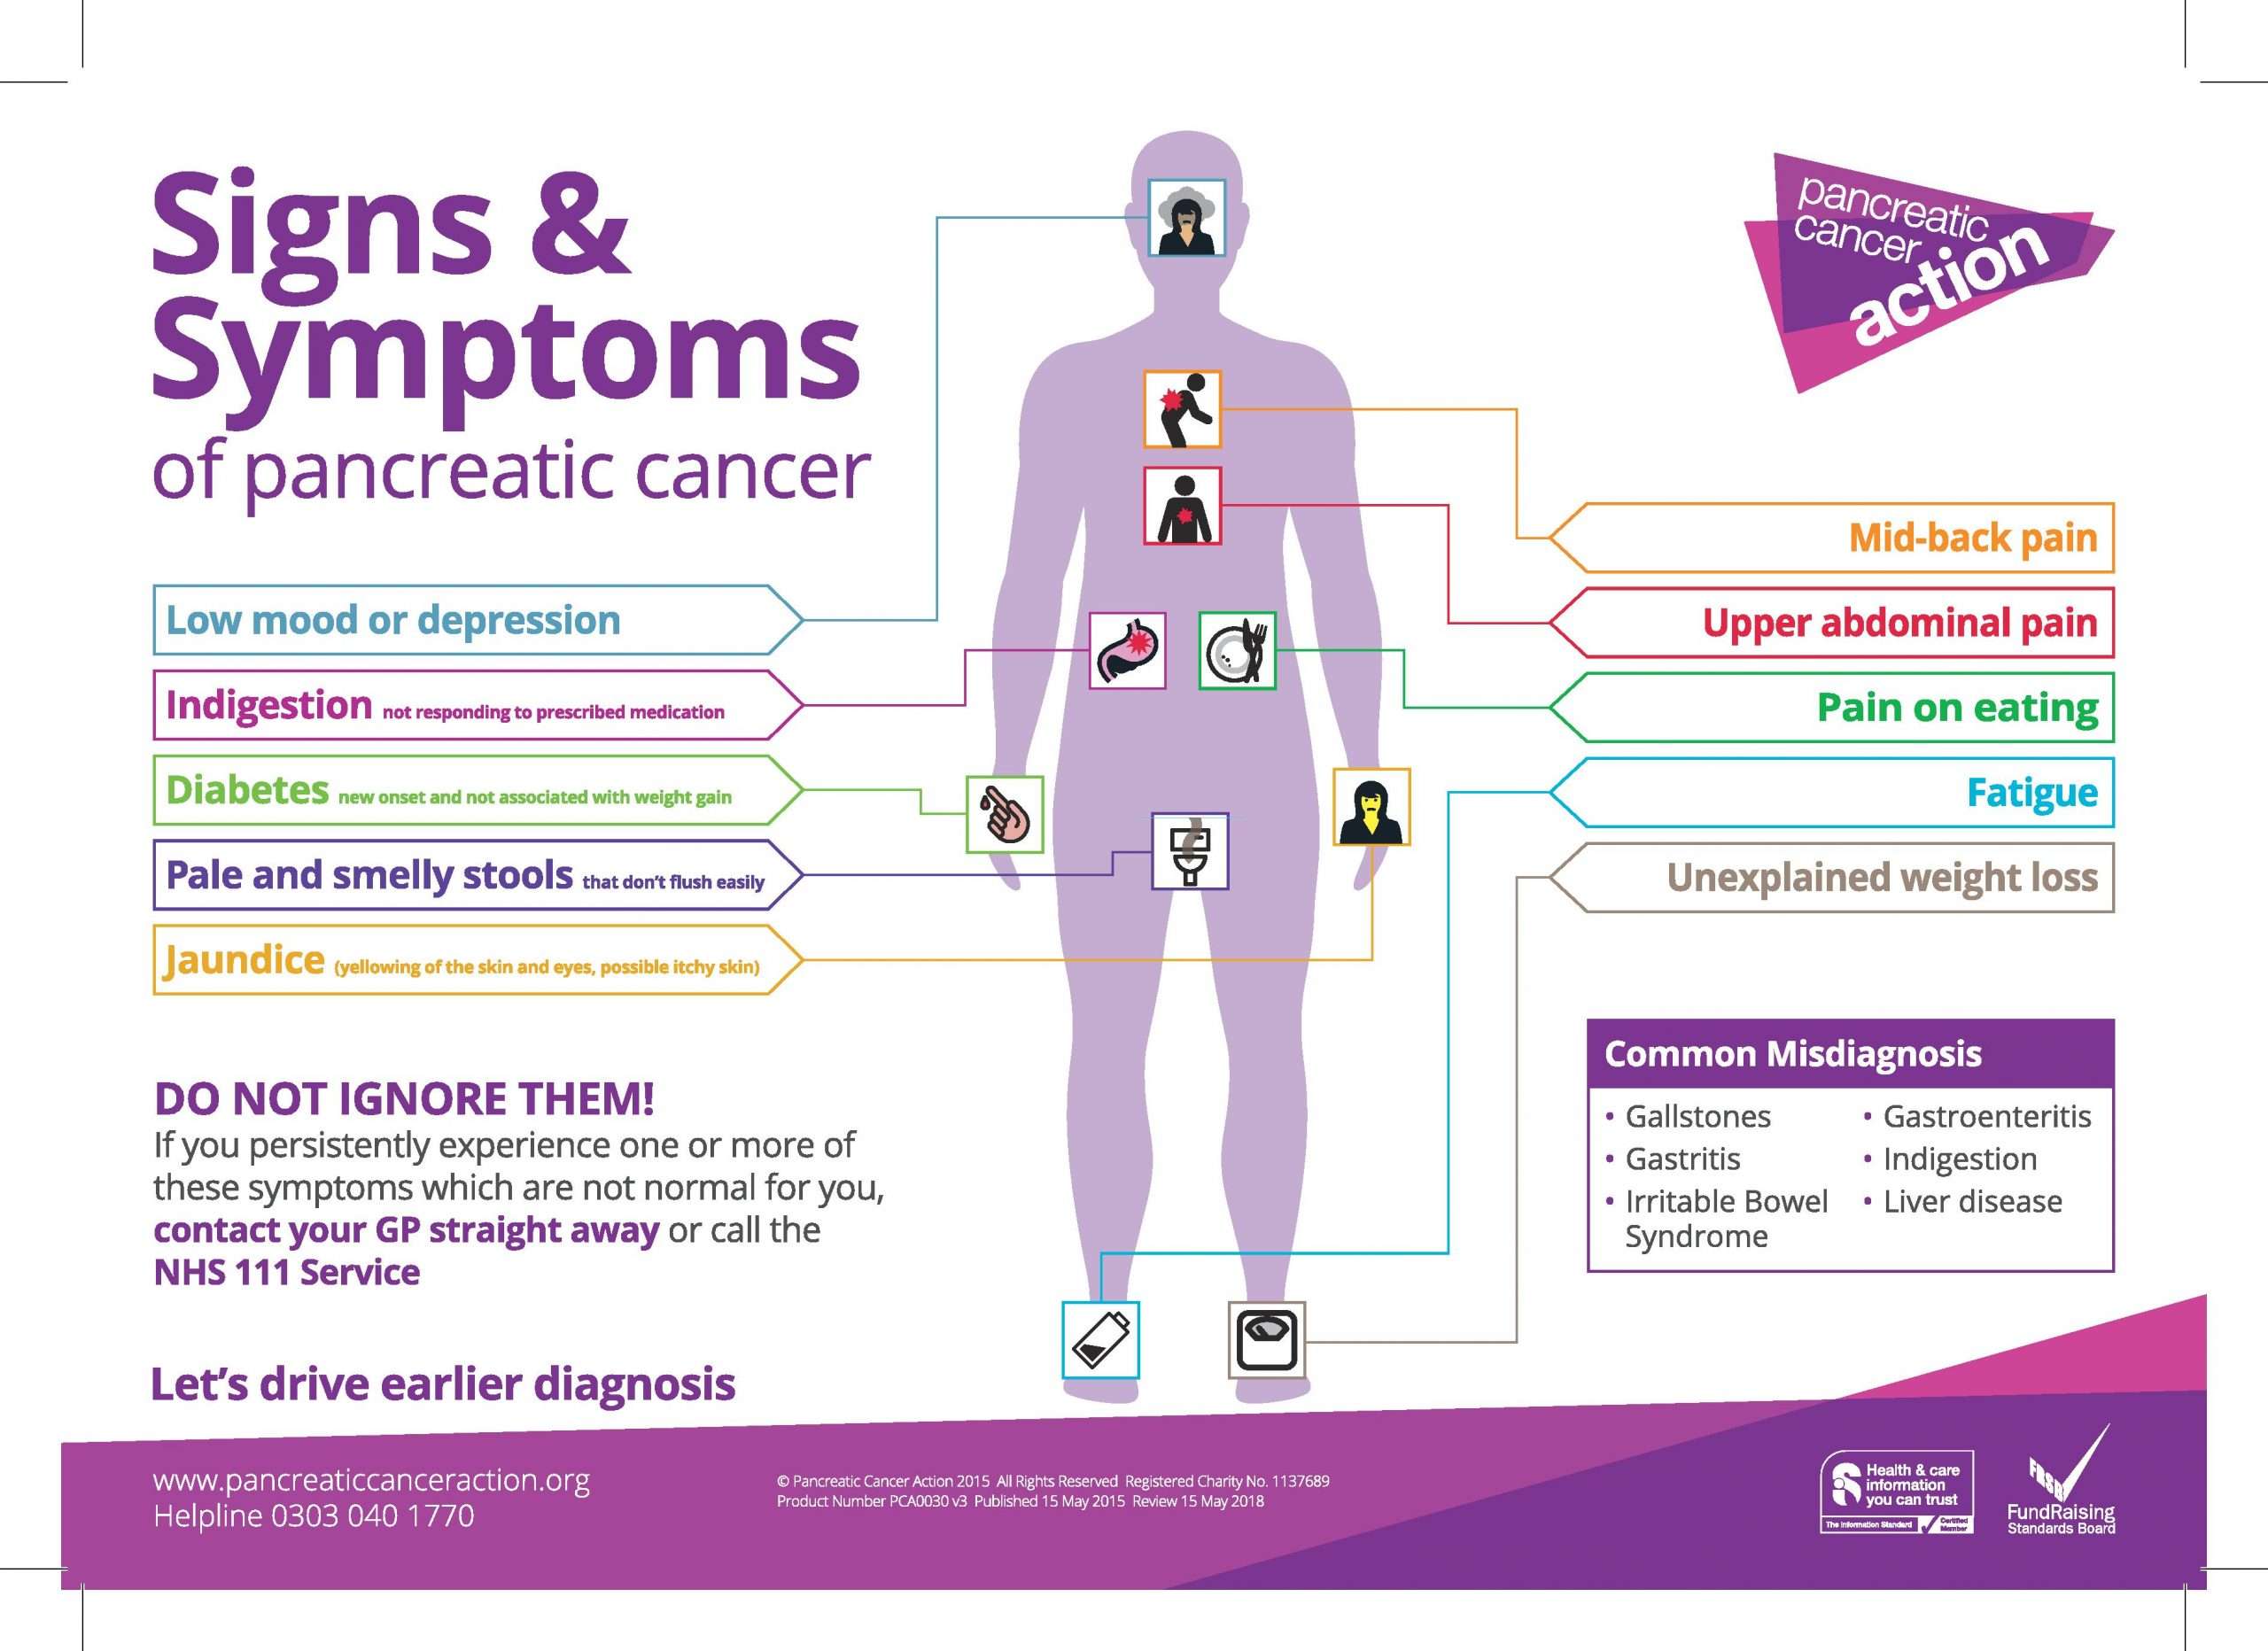 Symptoms Poster · Pancreatic Cancer Action